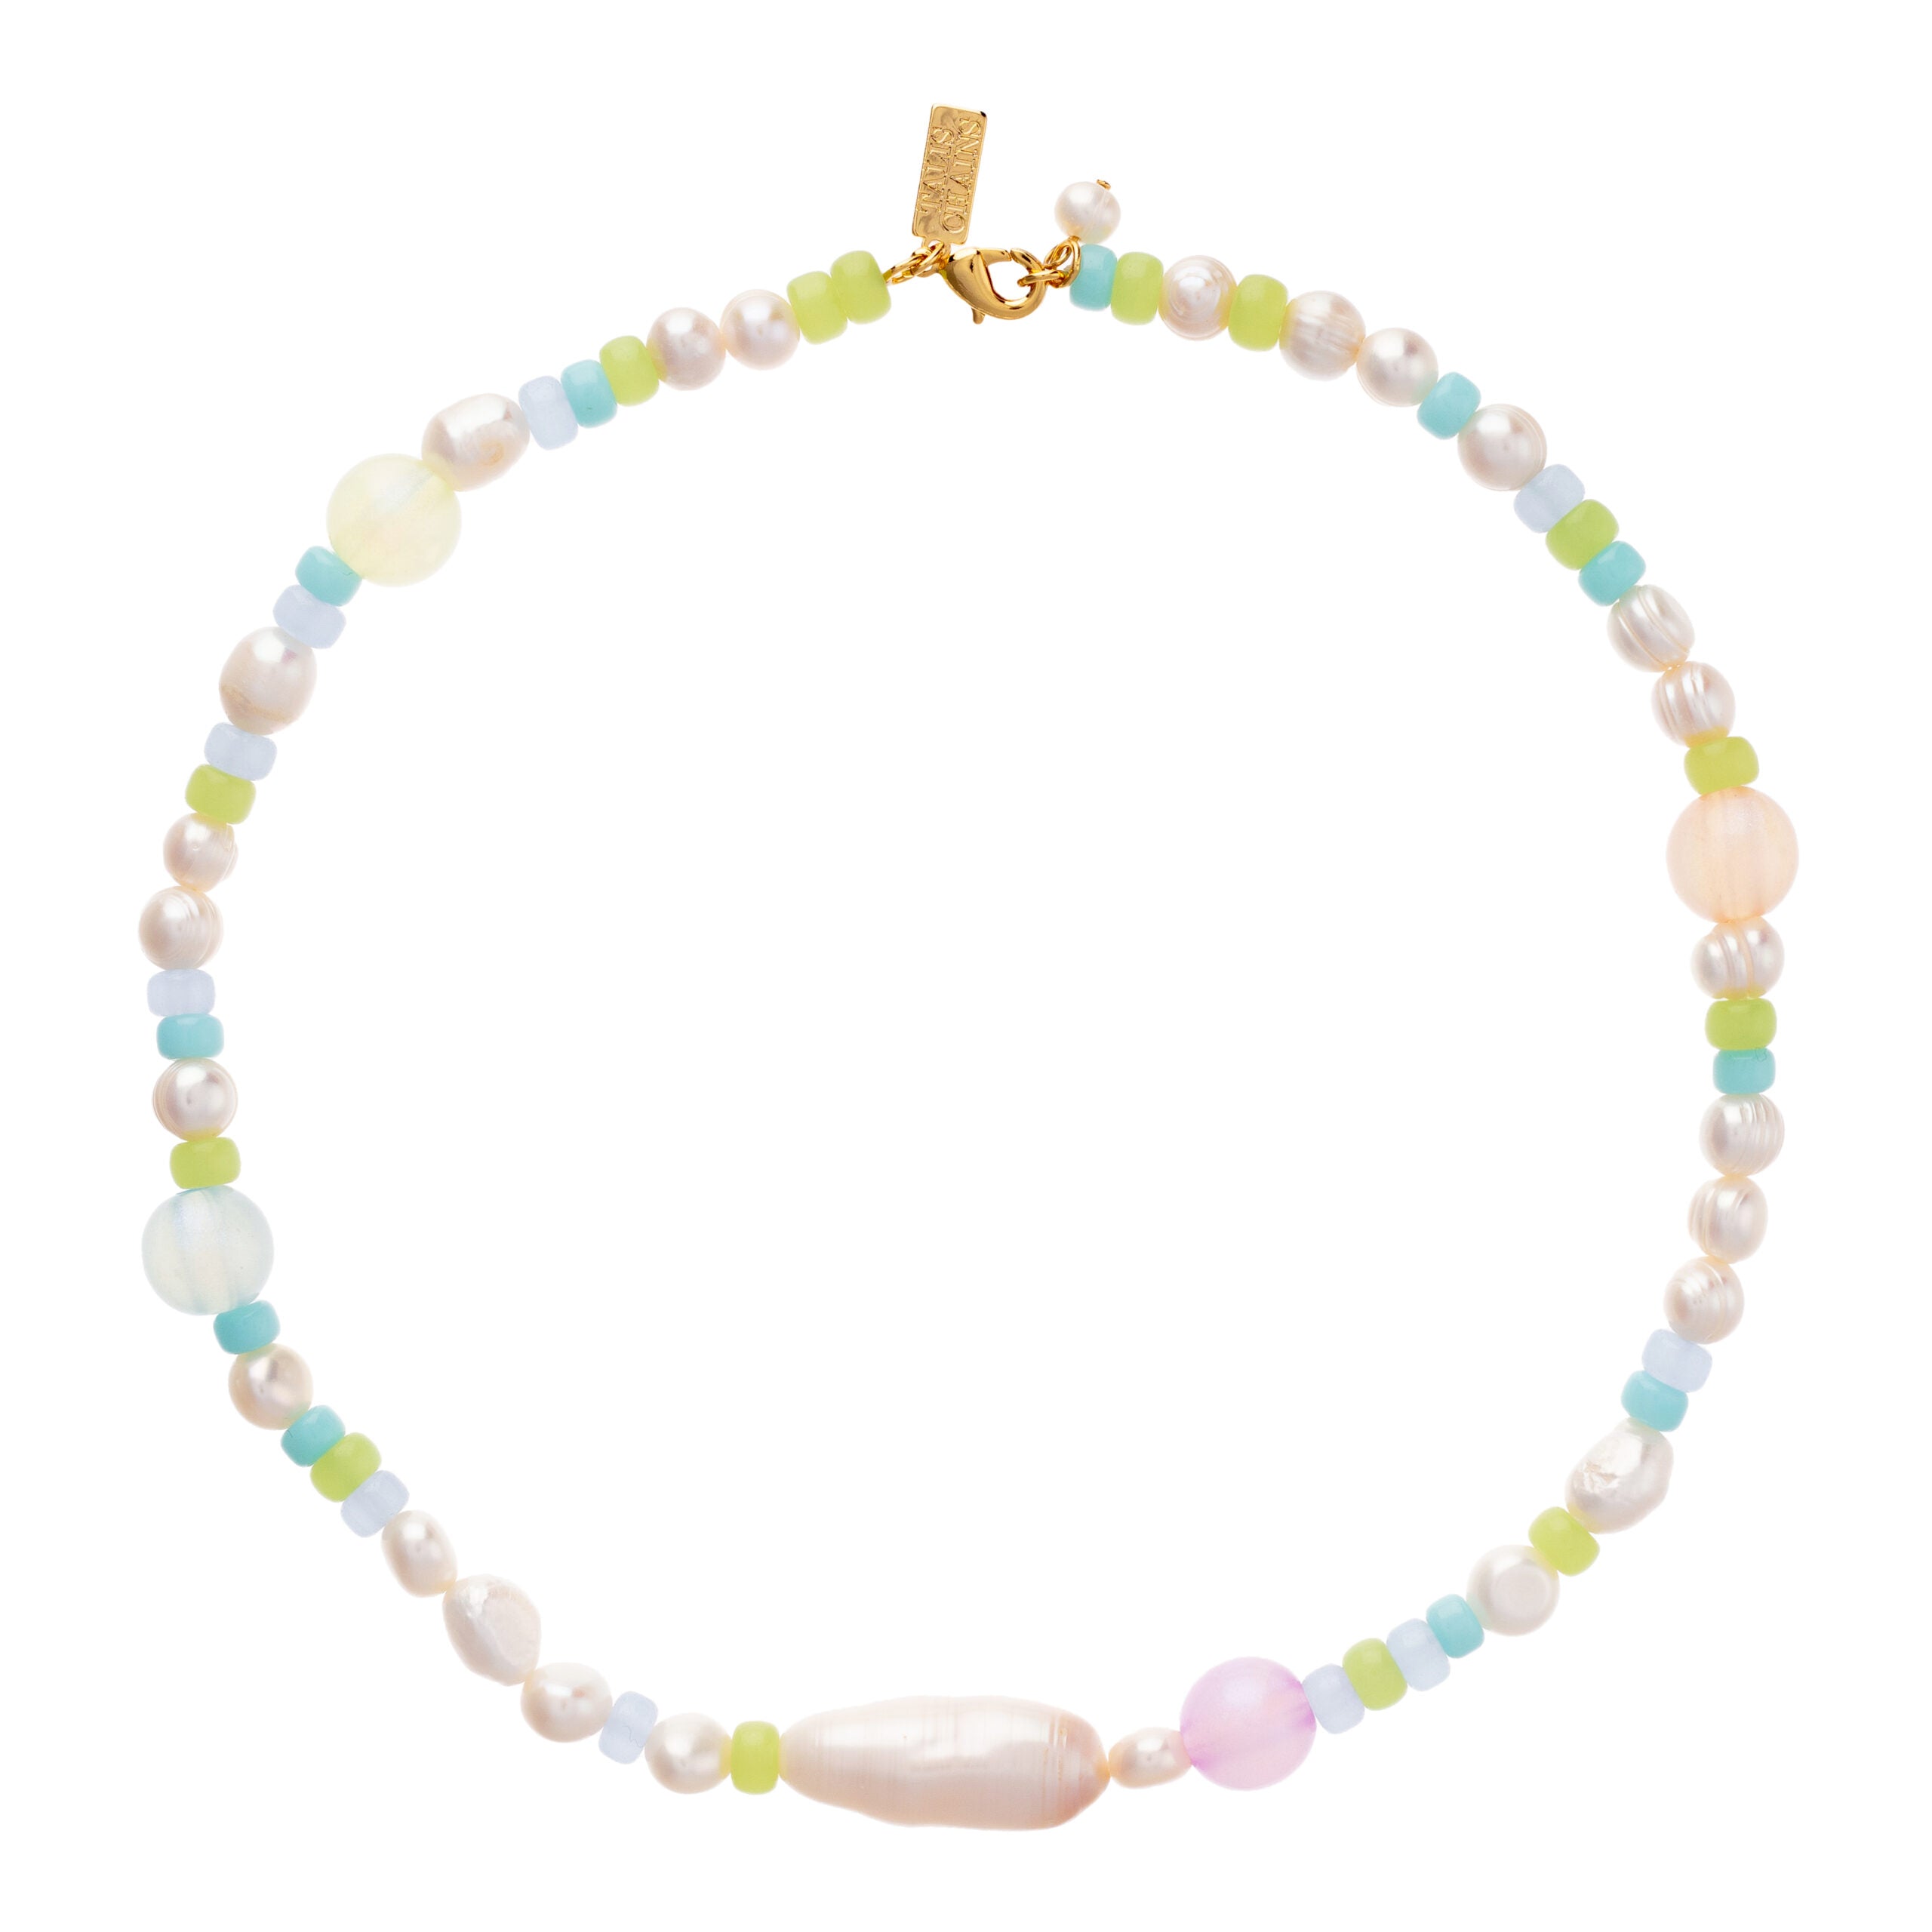 Talis Chains Hawaii Sunset Pearl Necklace